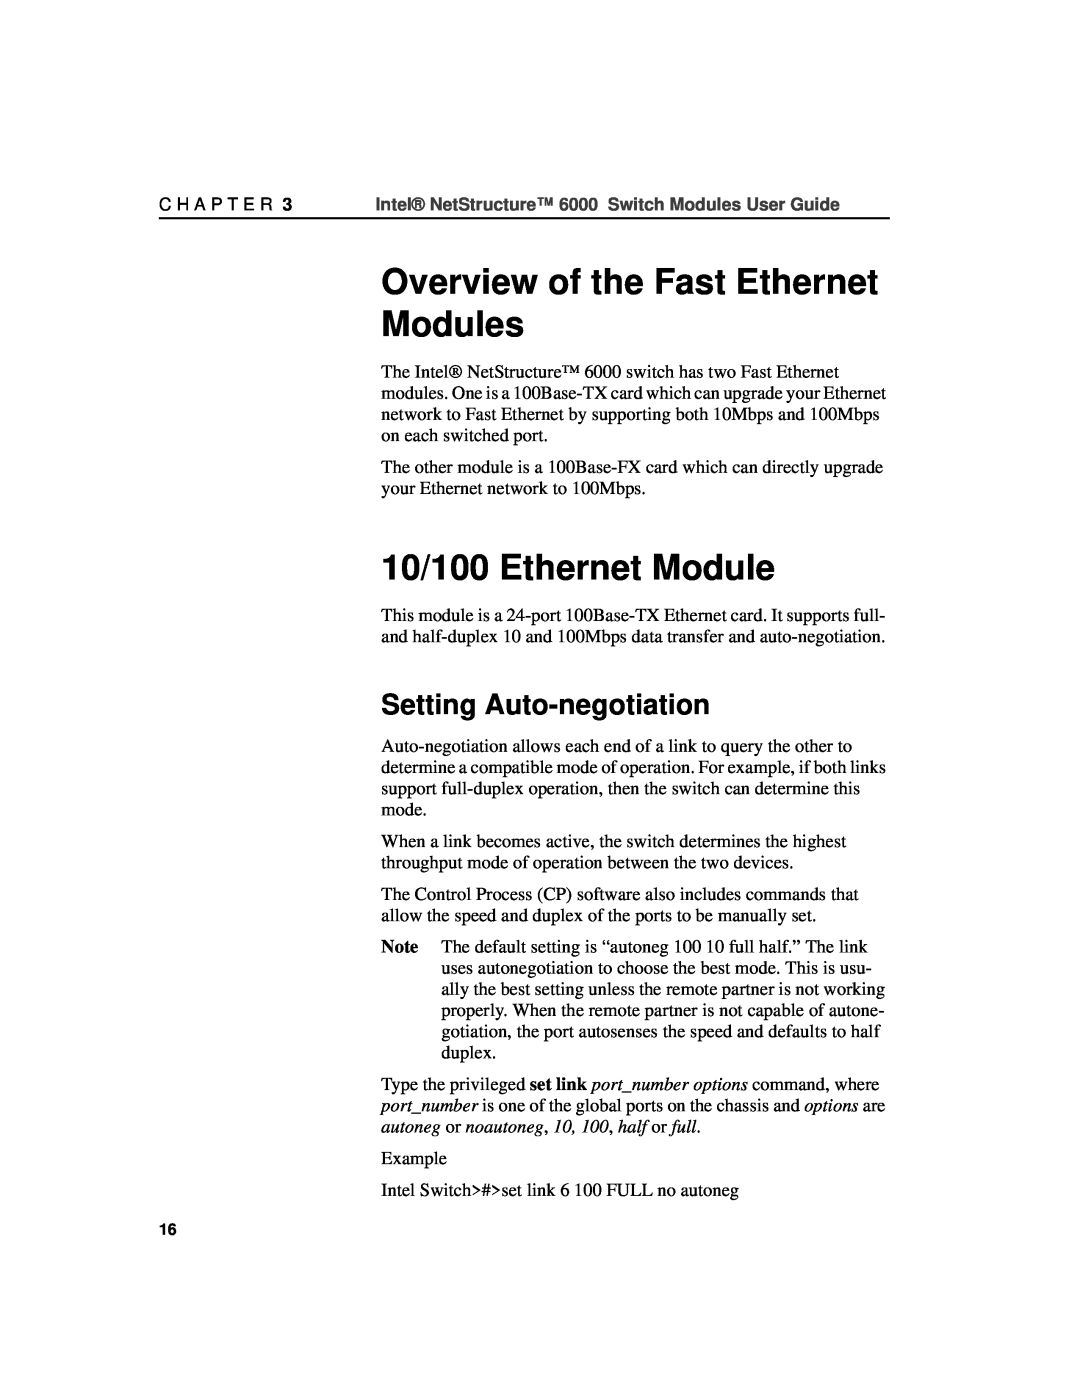 Intel A21721-001 manual Overview of the Fast Ethernet Modules, 10/100 Ethernet Module, Setting Auto-negotiation 